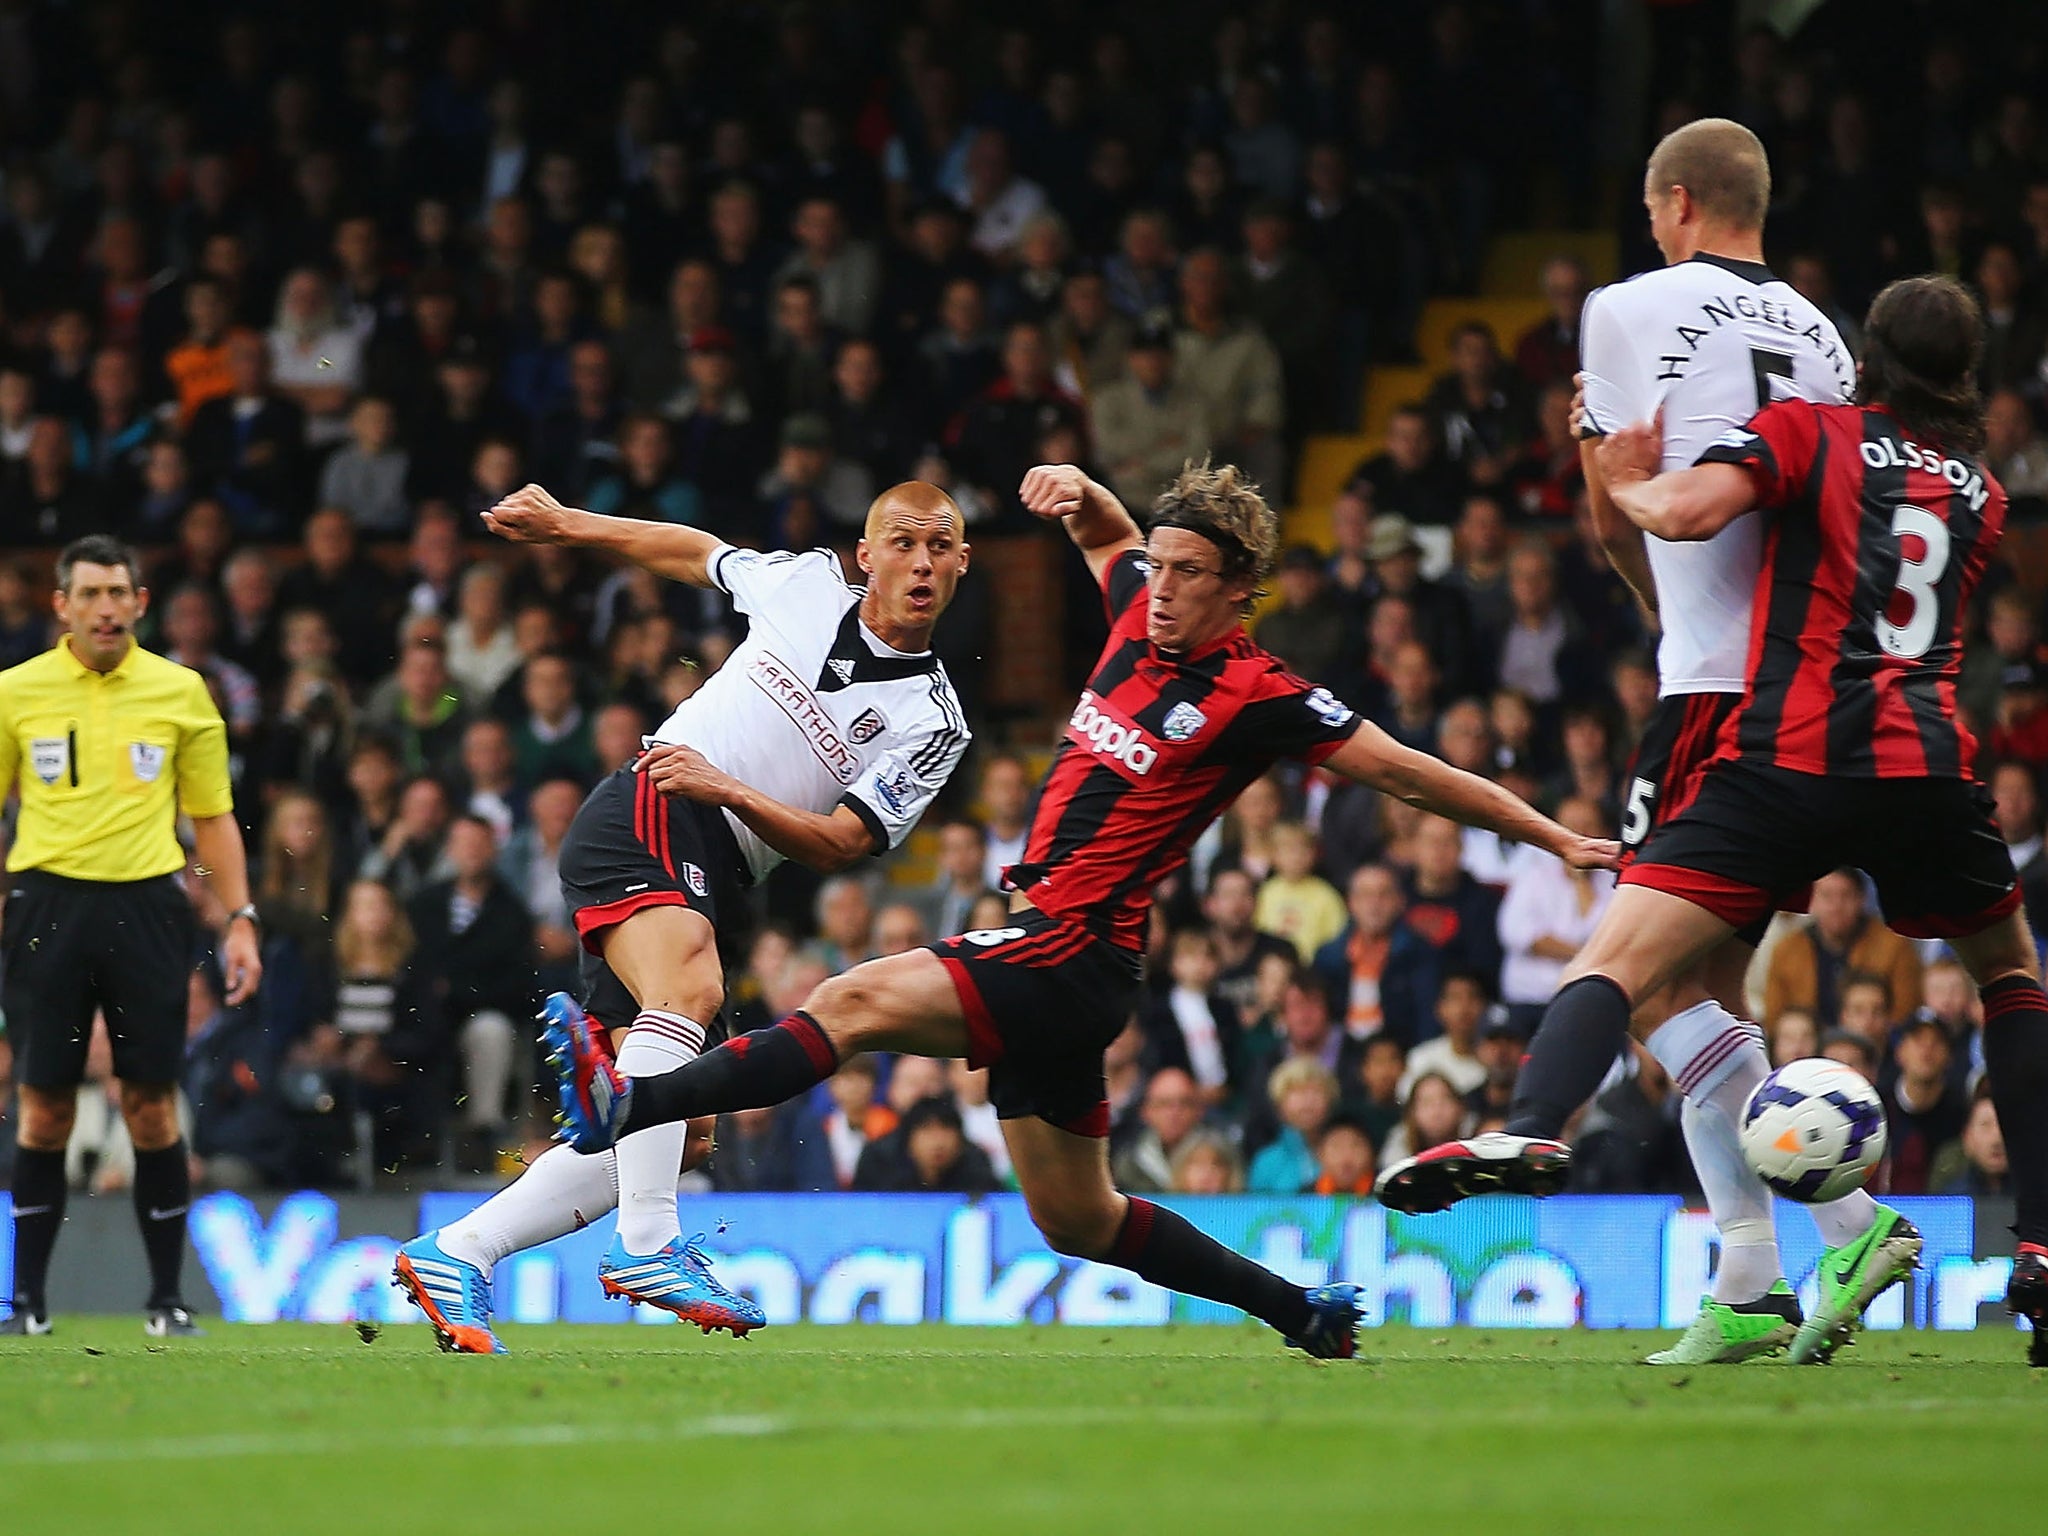 Steve Sidwell opens the scoring for Fulham against West Brom at Craven Cottage